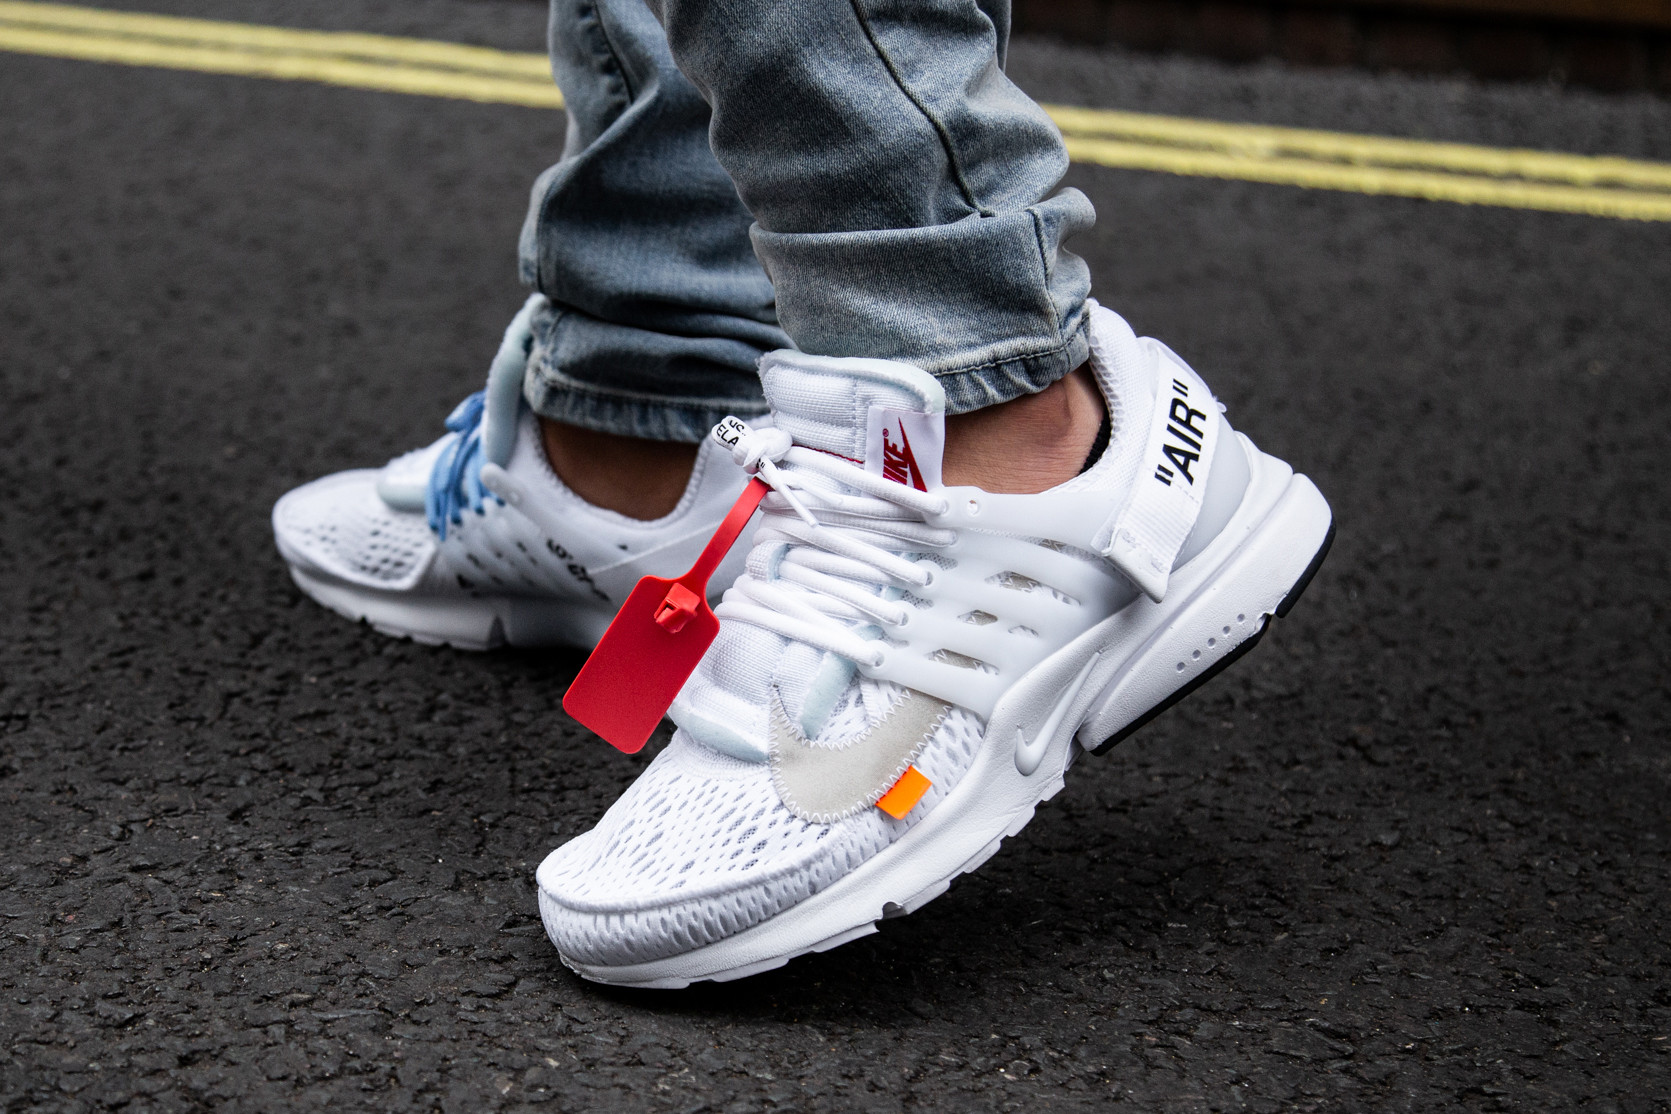 On foot Nike Air Presto teamed up with Virgil Abloh